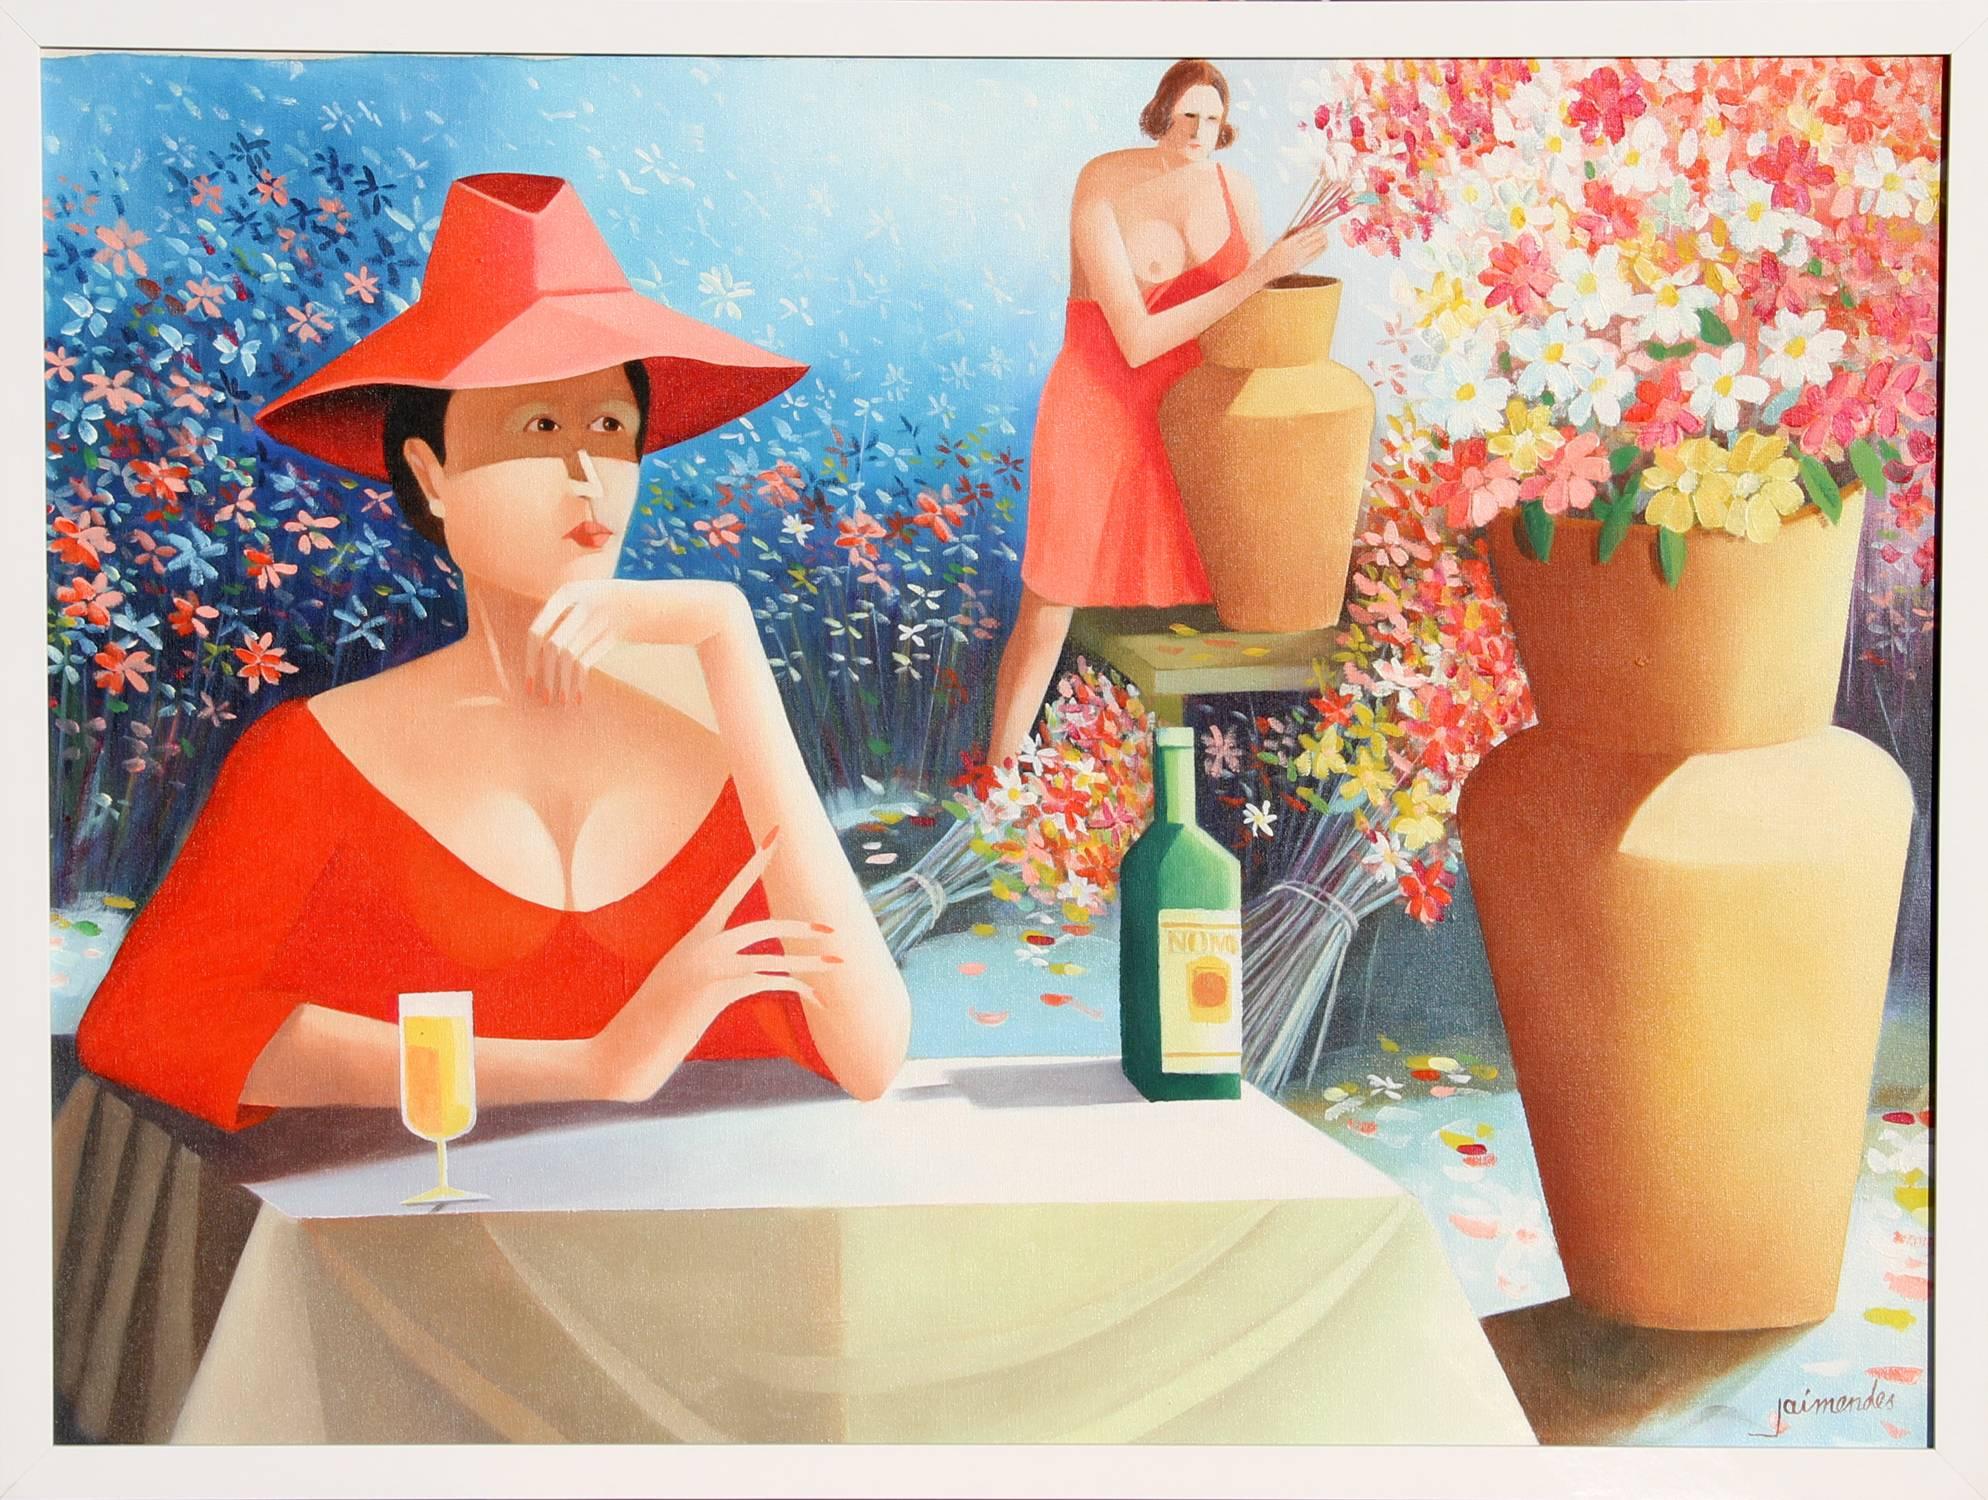 Artist: Jaimendes, Brazilian (1939 - )
Title: Mulher no jardin
Year: 1990
Medium: Acrylic on Canvas, signed l.r.
Size: 21 in. x 28 in. (53.34 cm x 71.12 cm)
Frame Size: 23 x 30 inches